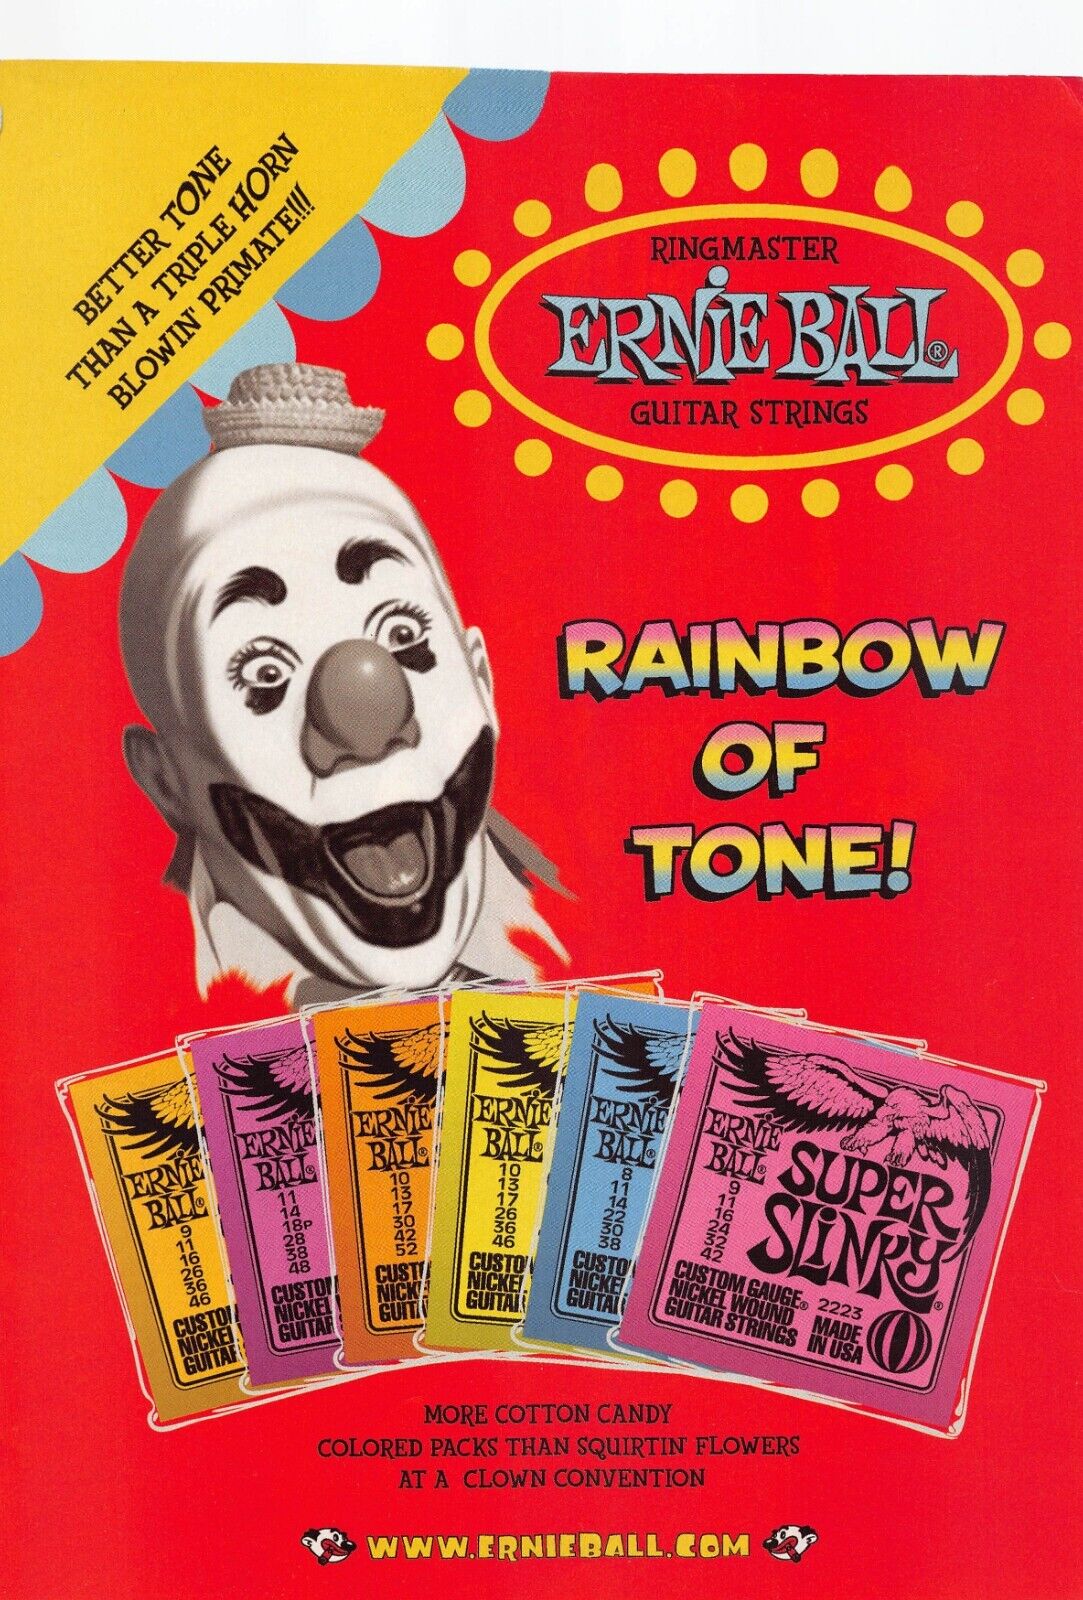 Ernie Ball Strings Print Ad Rainbow Of Better Tone Cotton Candy Colored Packs